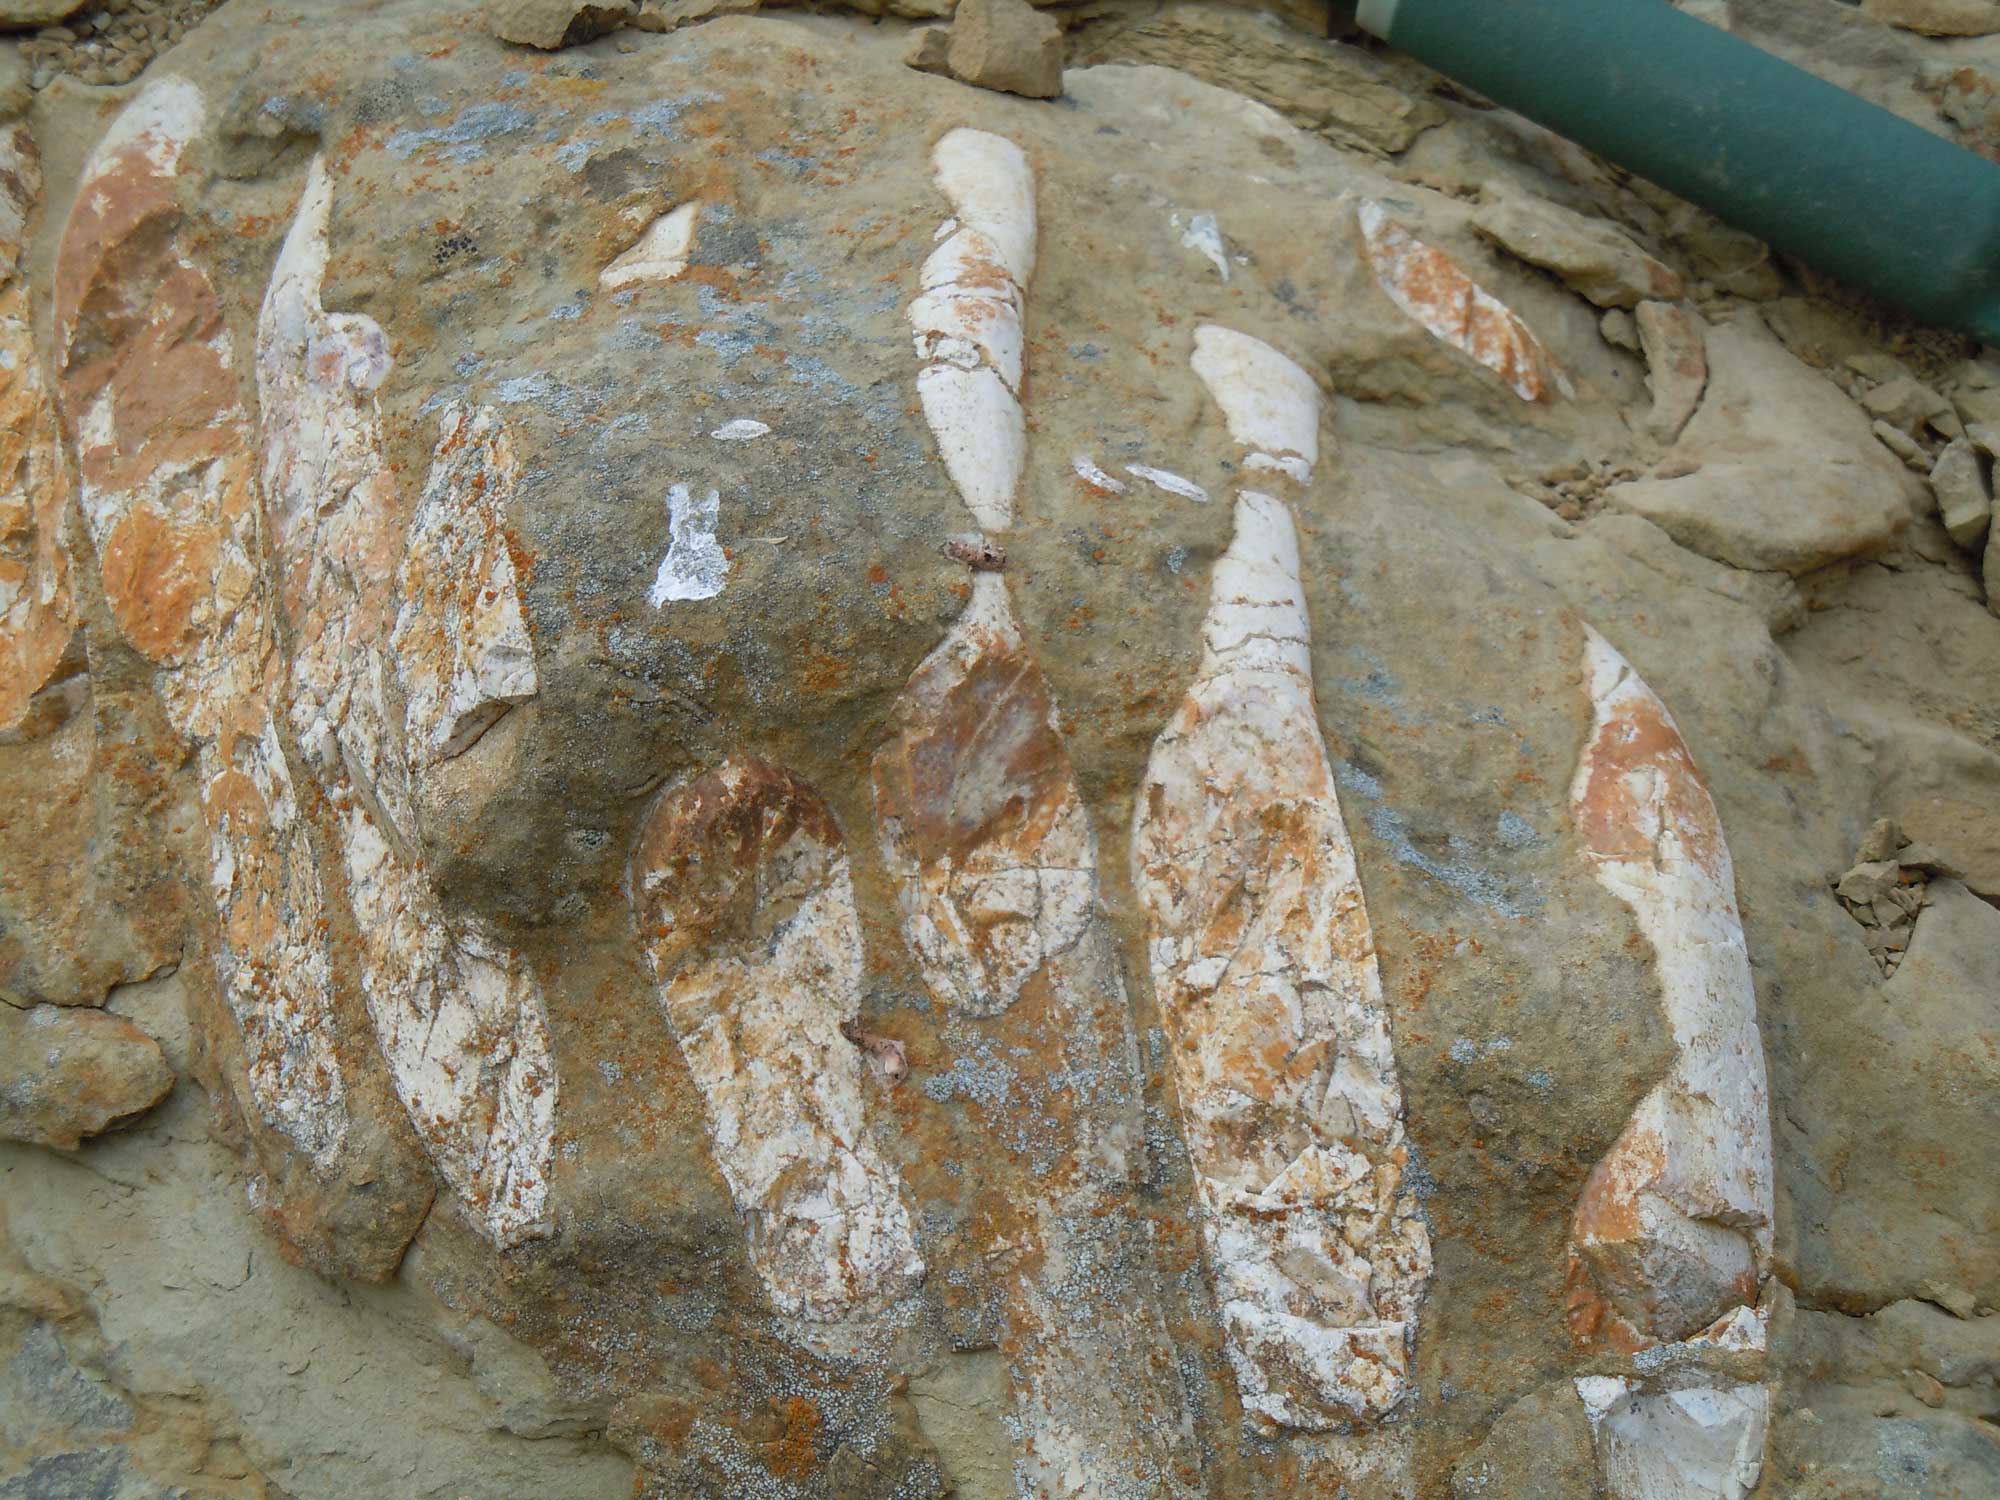 Photograph of the ribs of a sea cow from the Oligocene to Miocene of Santa Rosa Island, California. The bones are white and are arranged in parallel. They are embedded in brown rock matrix.